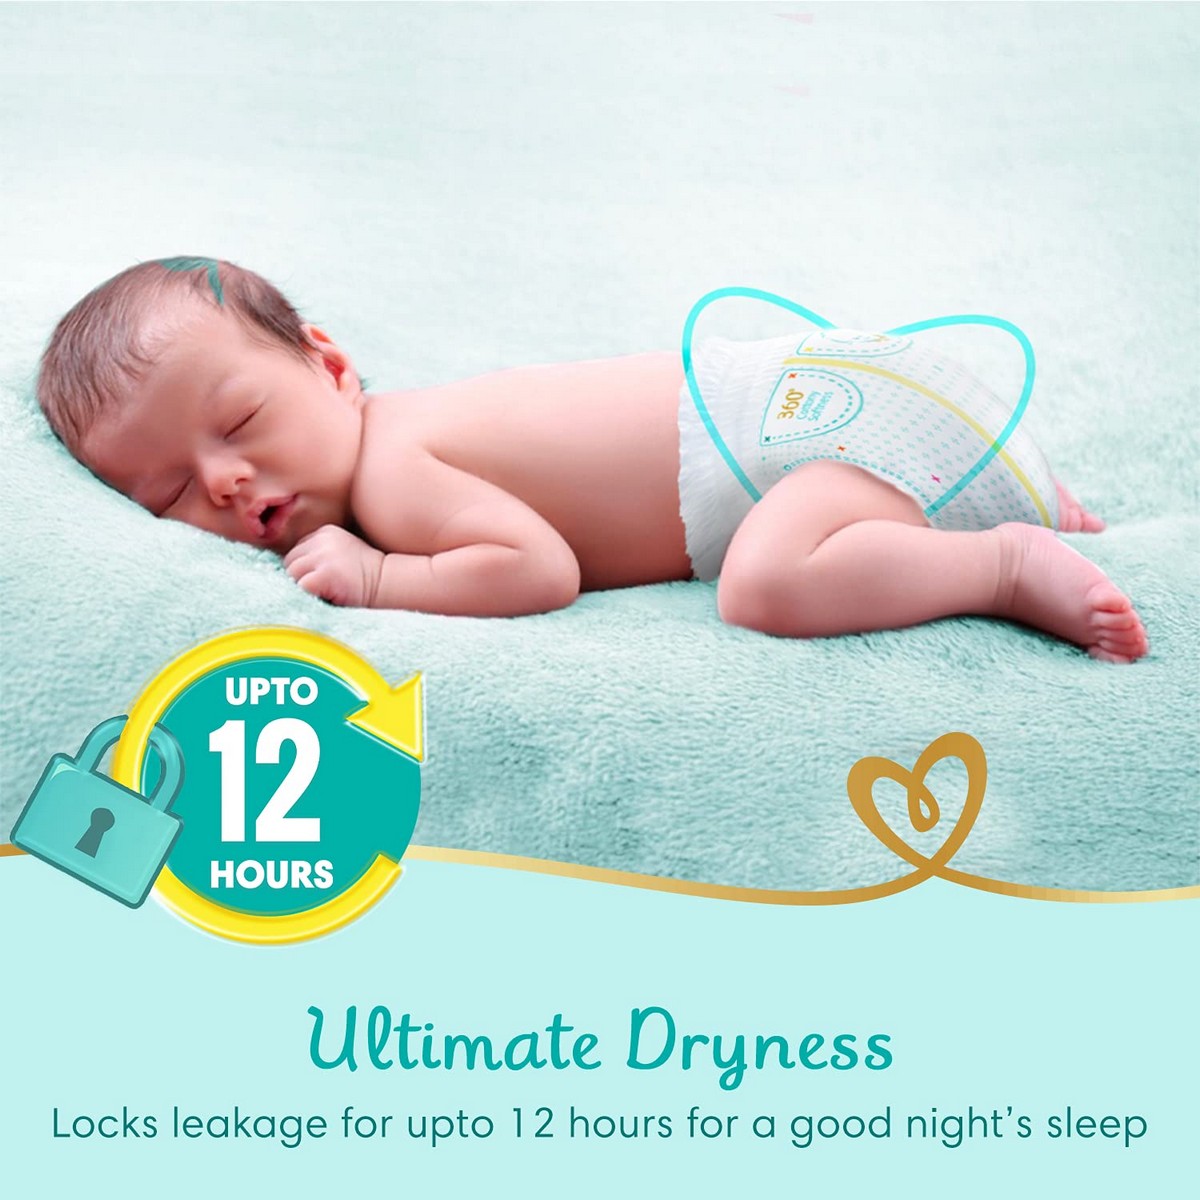 Buy Pampers Premium Care Pants, Medium size baby diapers (M), 54